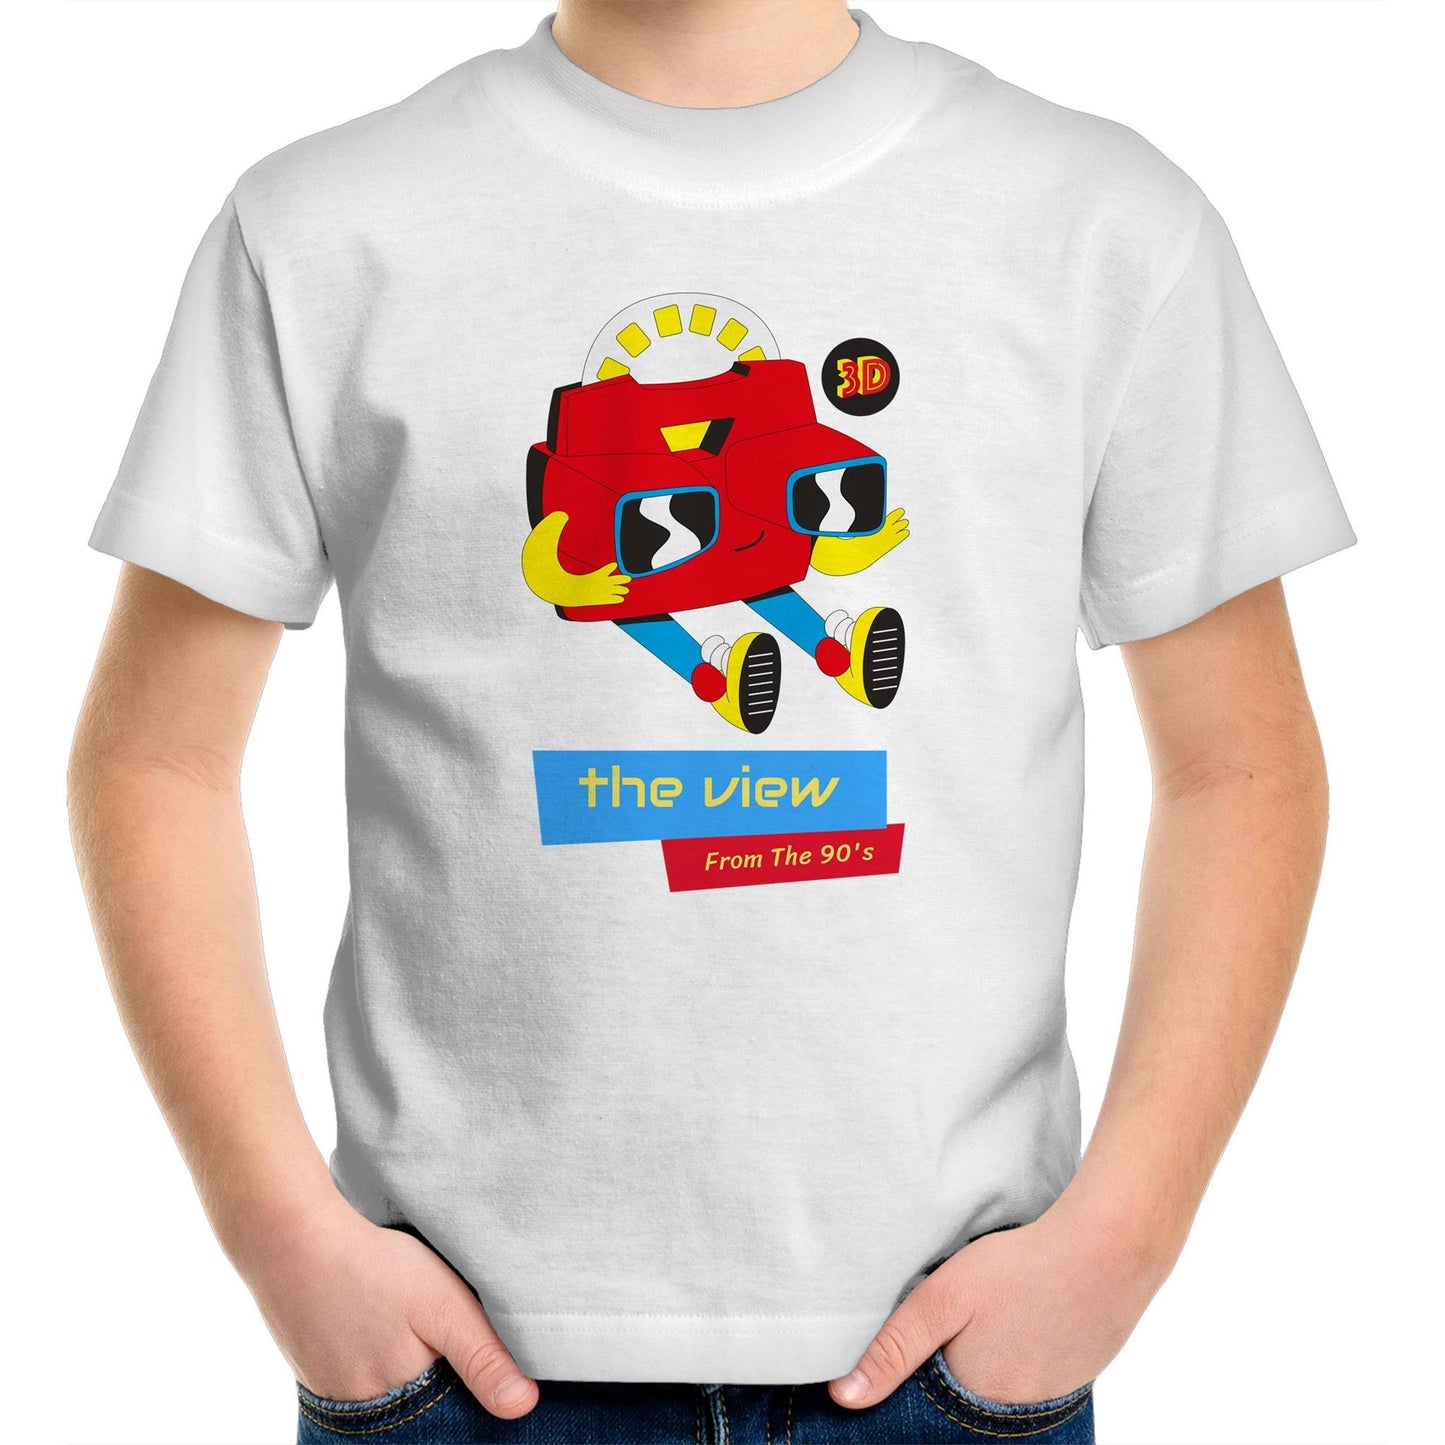 The View From The 90's - Kids Youth Crew T-Shirt White Kids Youth T-shirt Retro